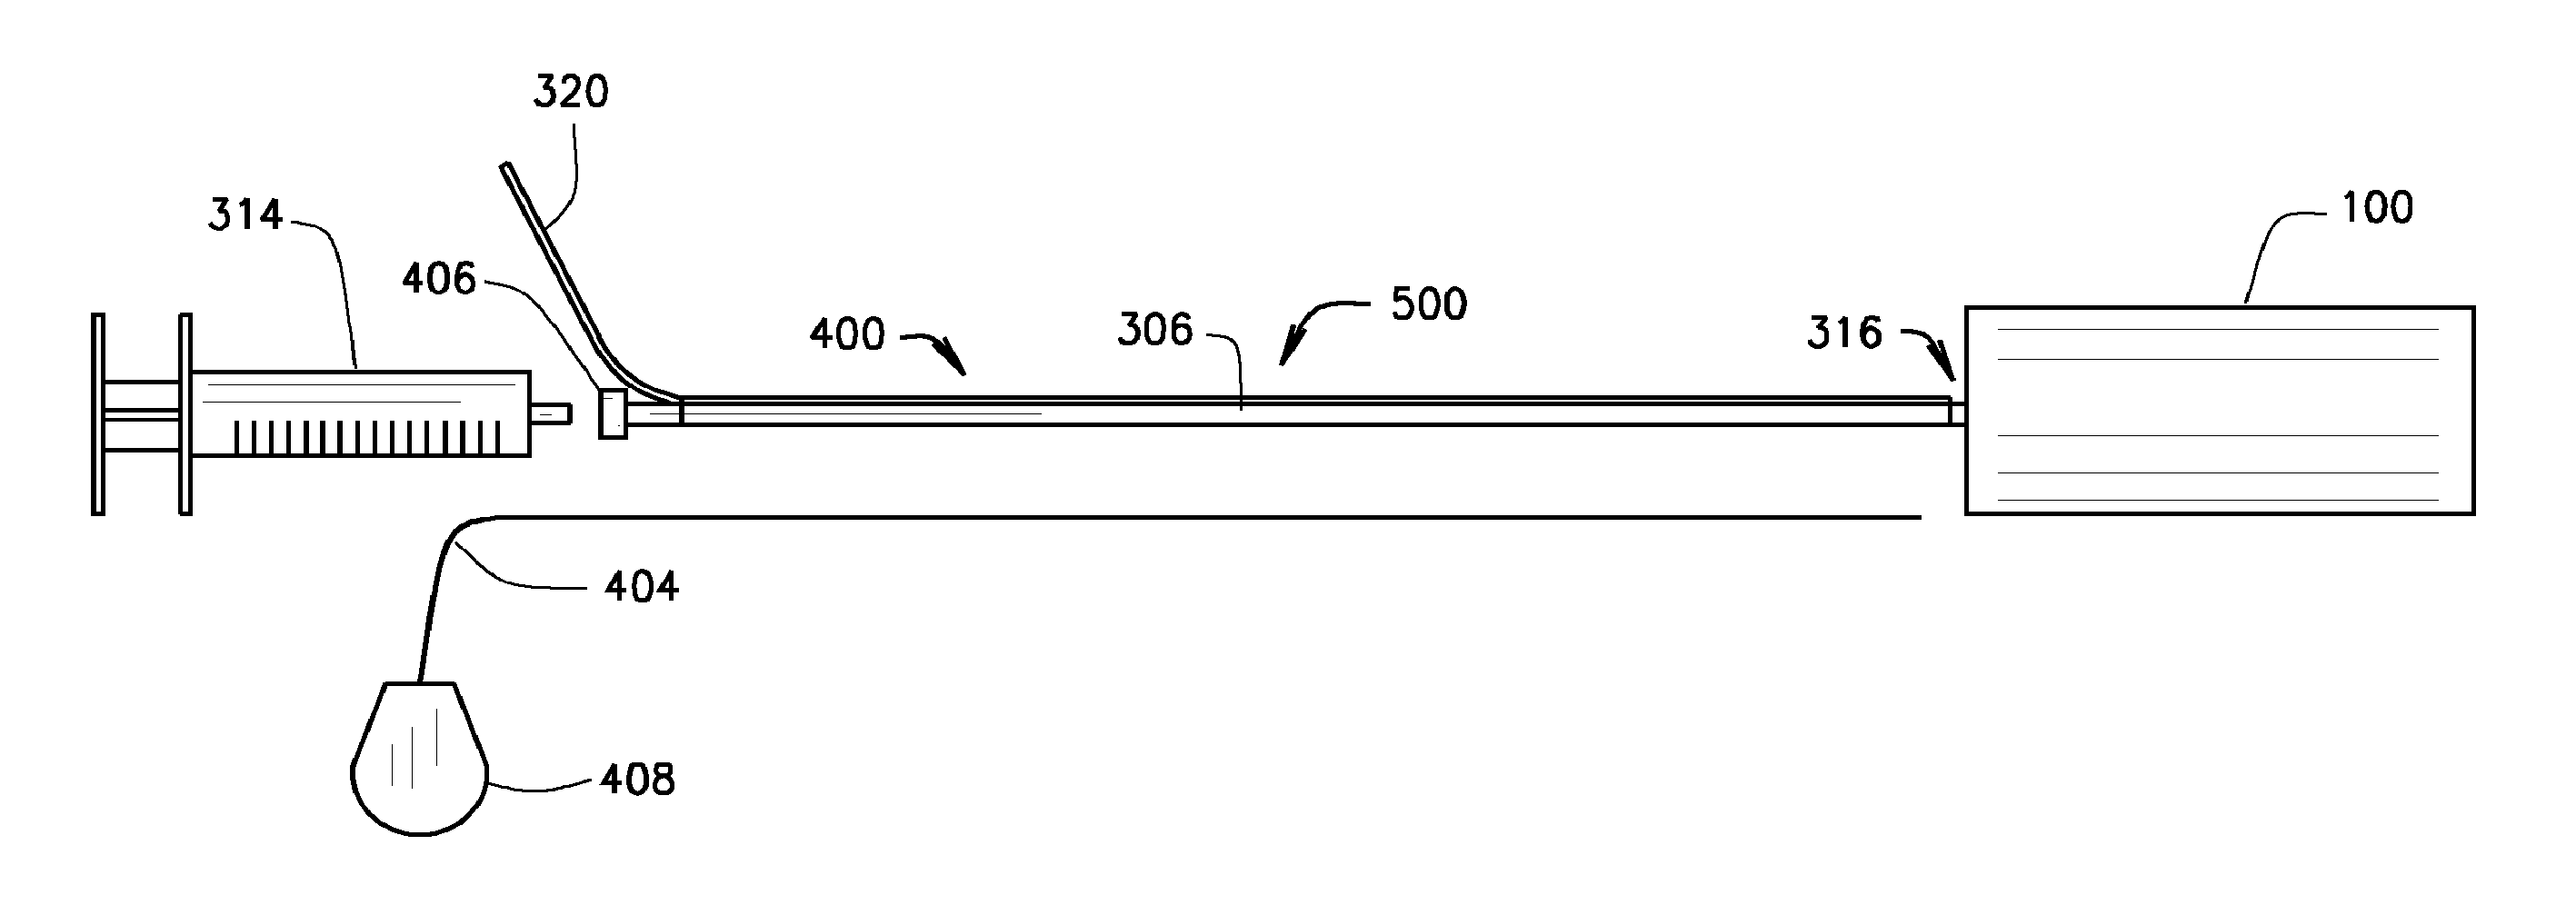 Blockstent device and methods of use